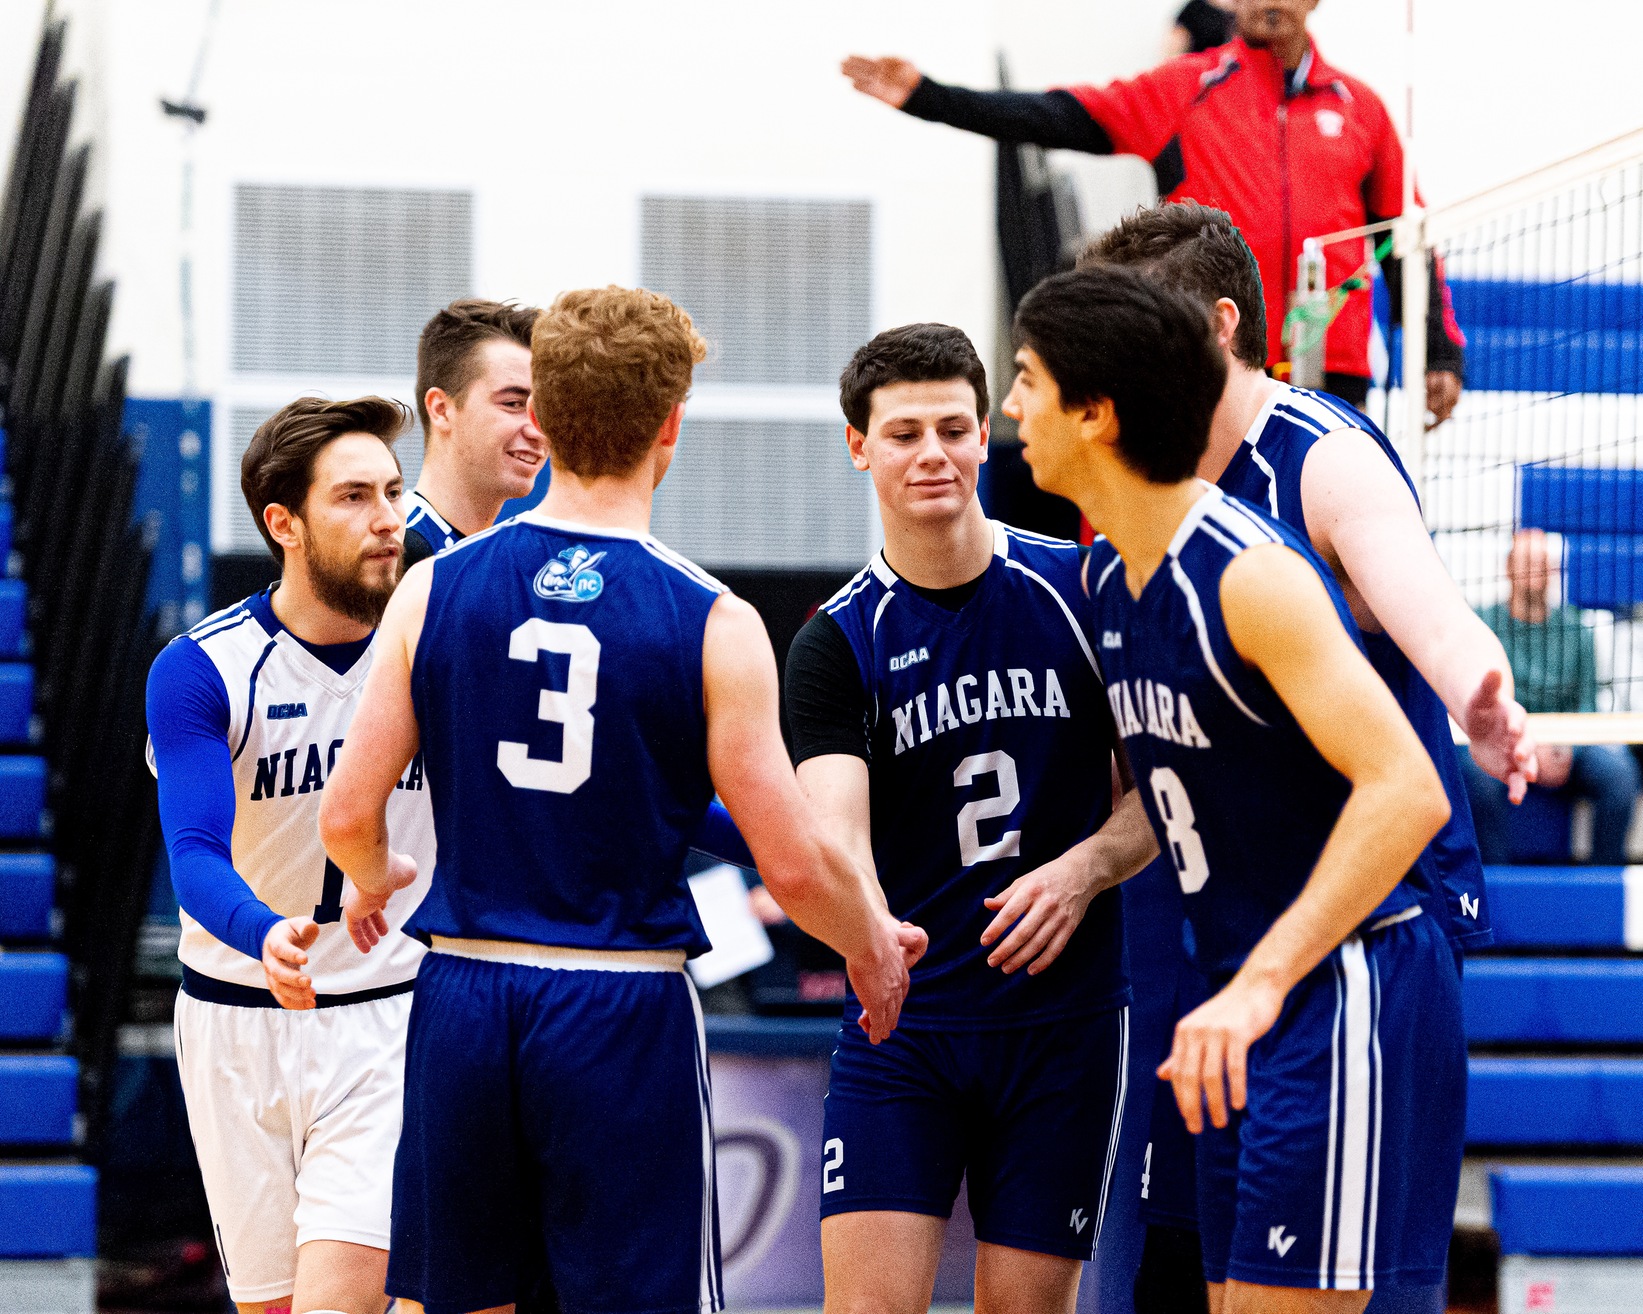 Knights Men’s Volleyball Victorious over St. Clair Saints